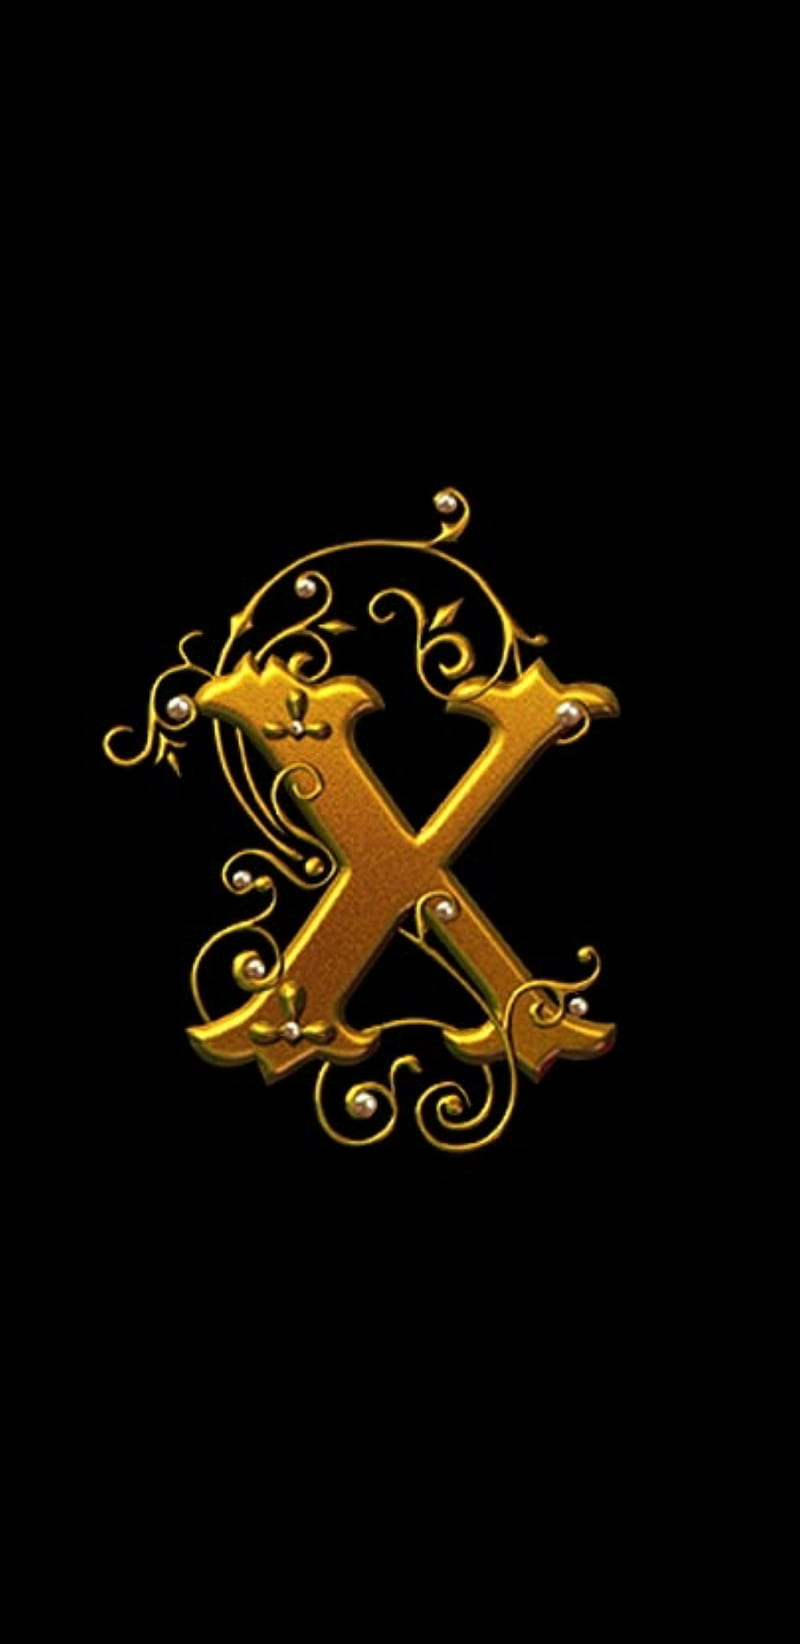 HD the letter of x wallpapers | Peakpx